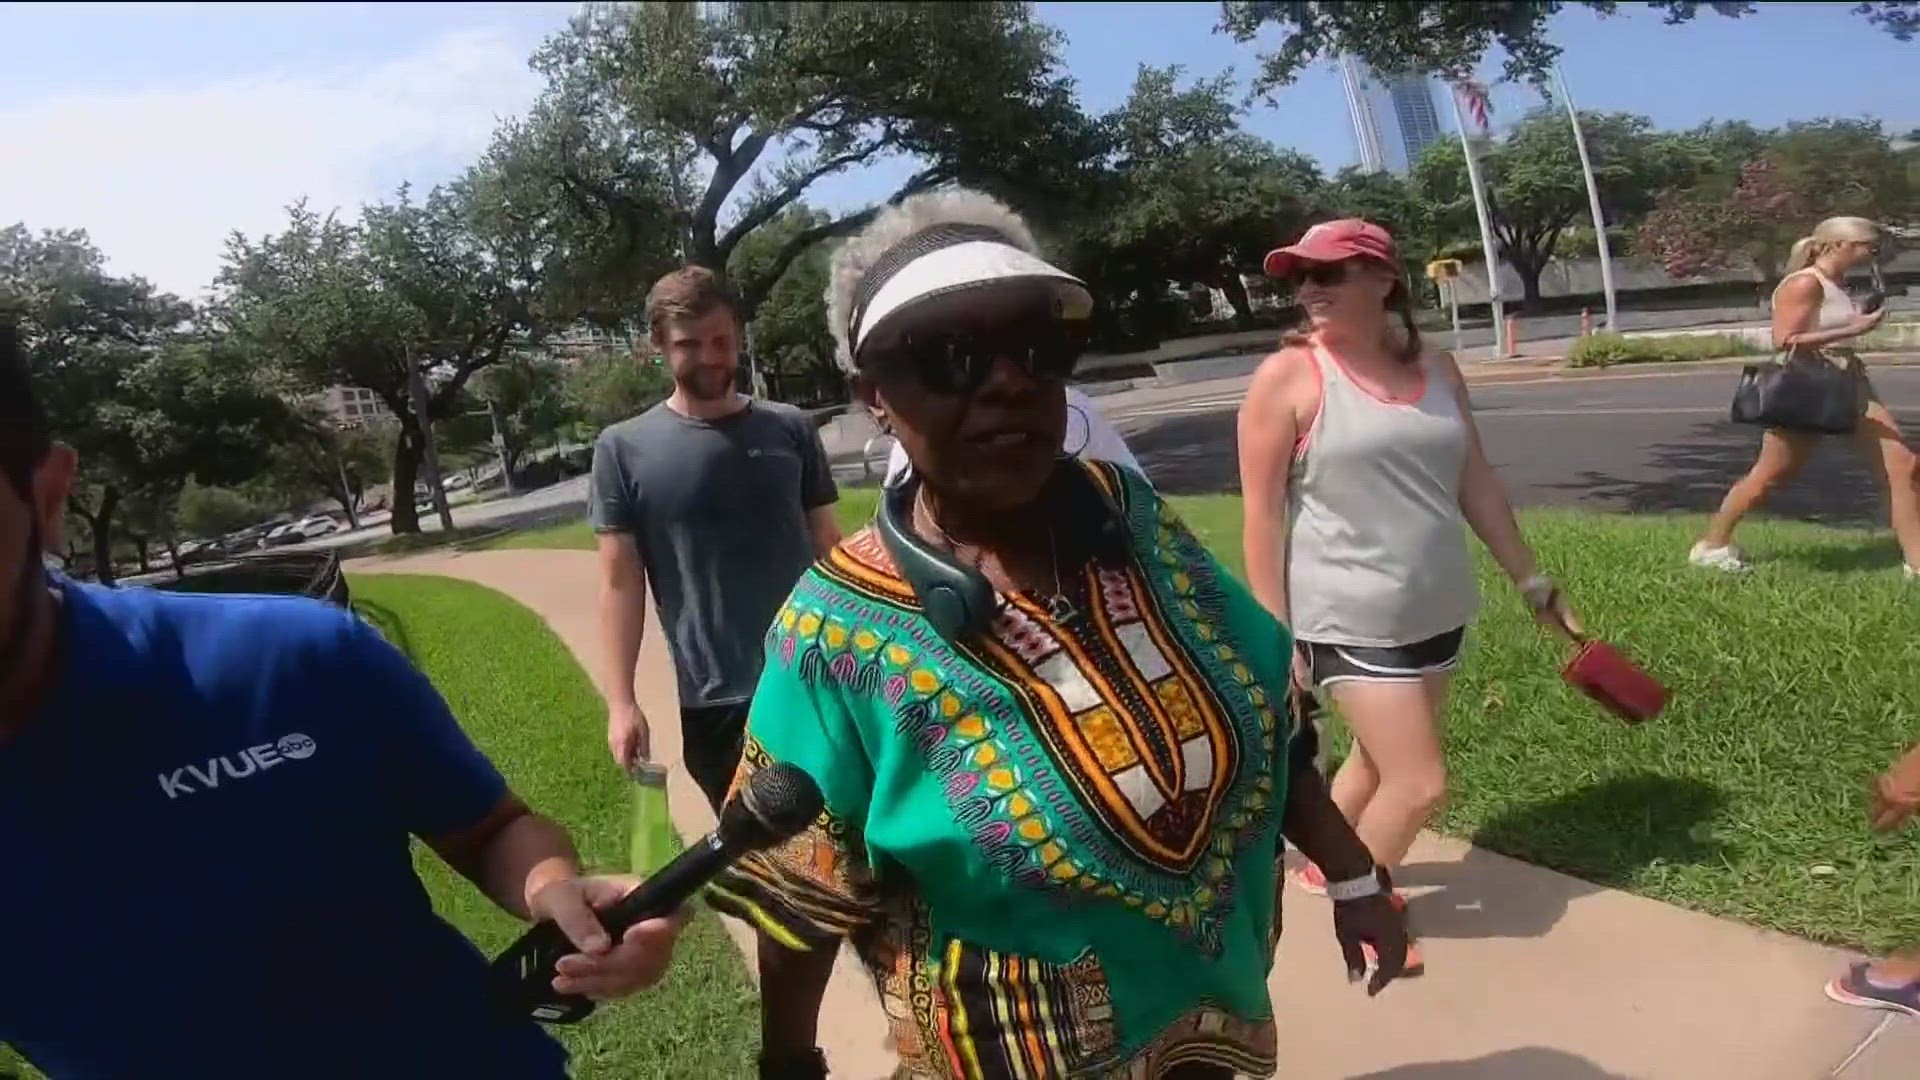 Celebrations are going on throughout Central Texas to commemorate Juneteenth. Across Austin, people wanted to emphasize the significance of today.